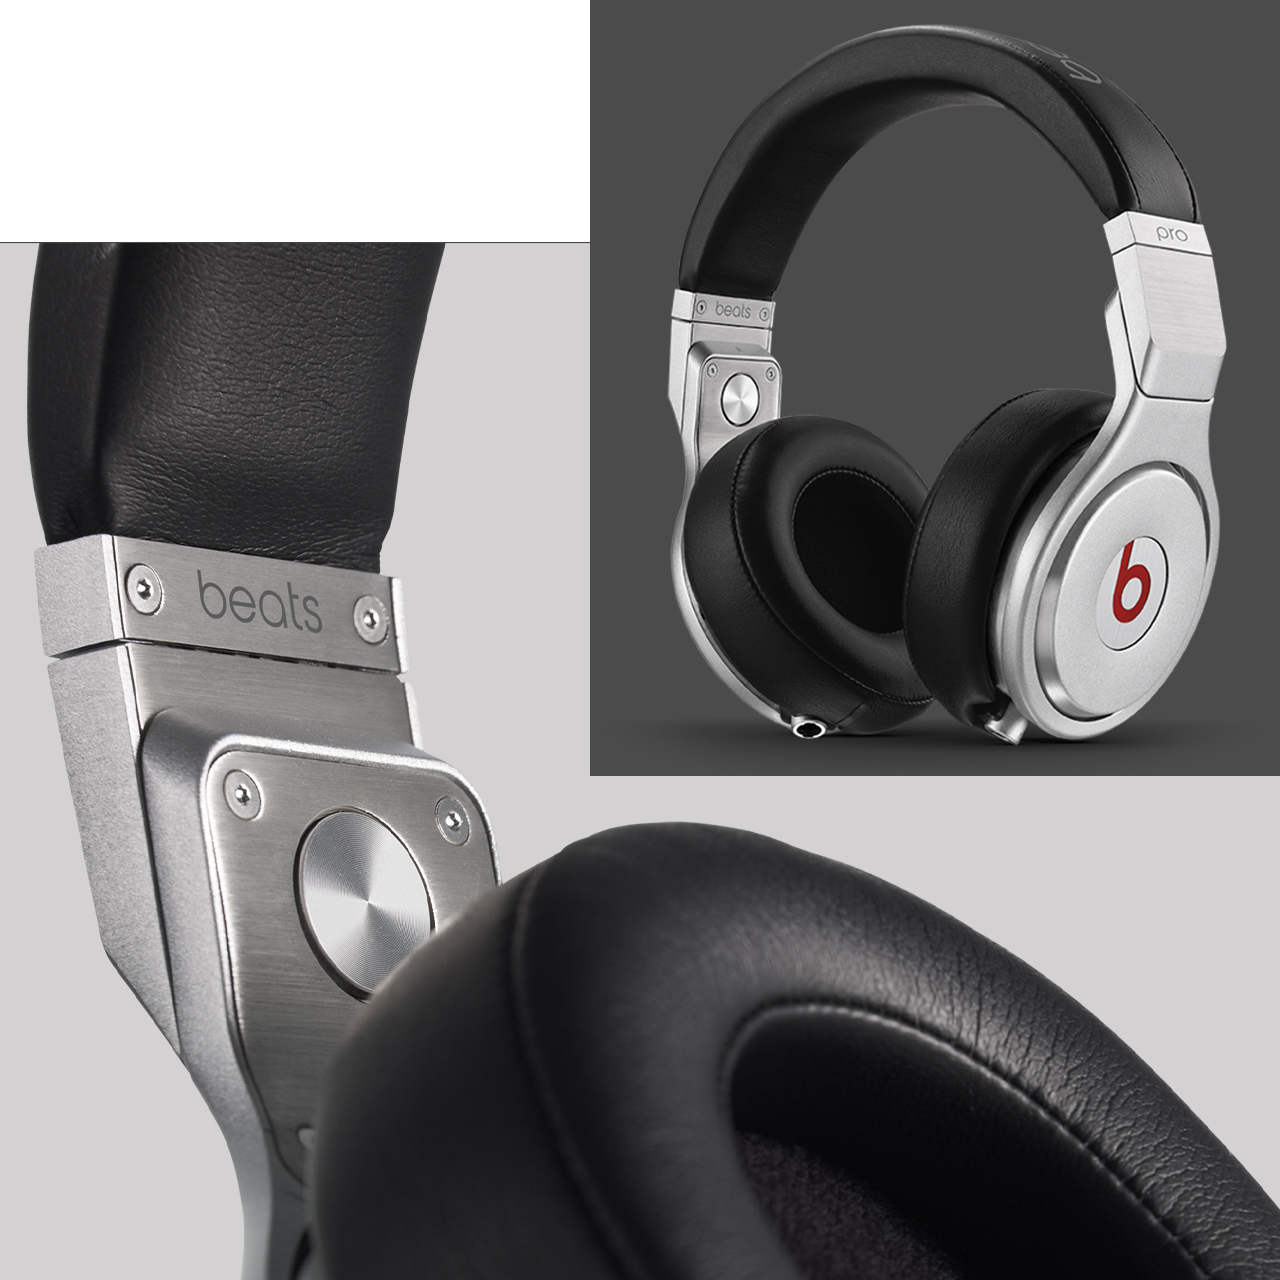 Beats Support - Beats by Dre